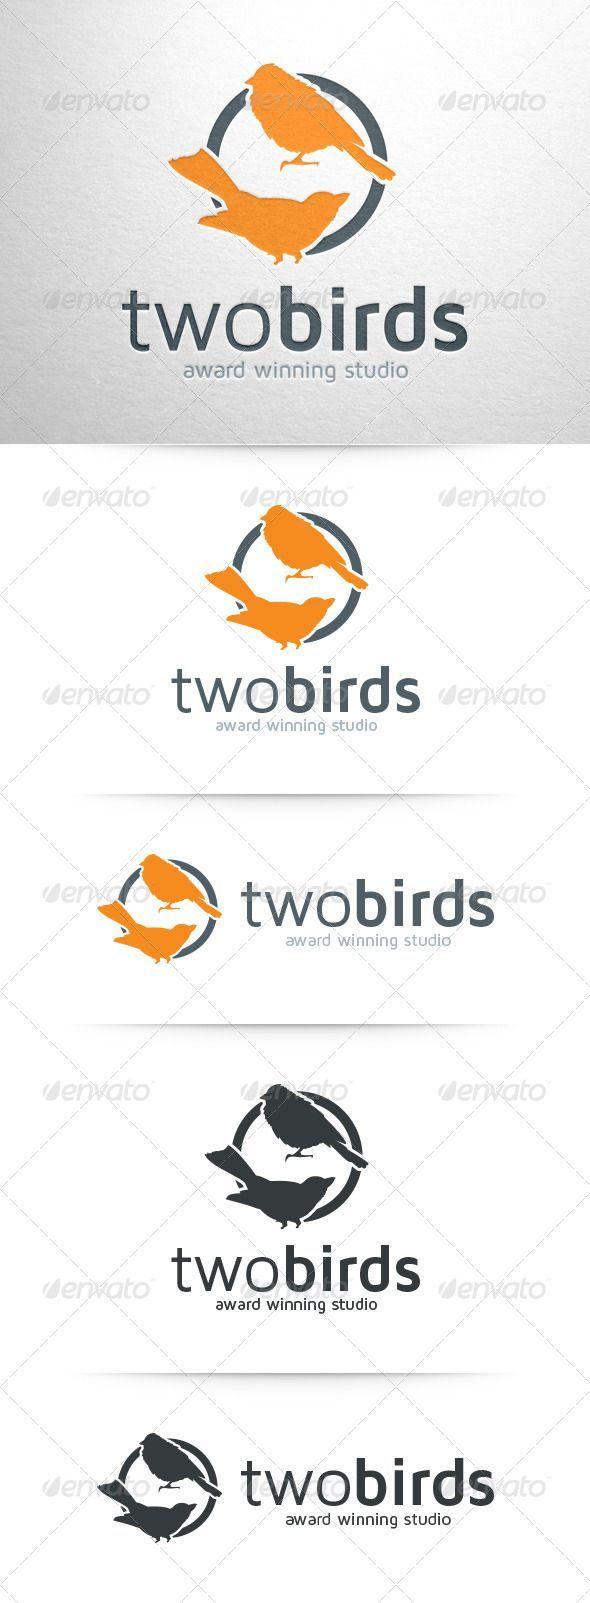 Two Birds in a Circle Logo - The Two Birds Logo Template A modern and professional logo template ...